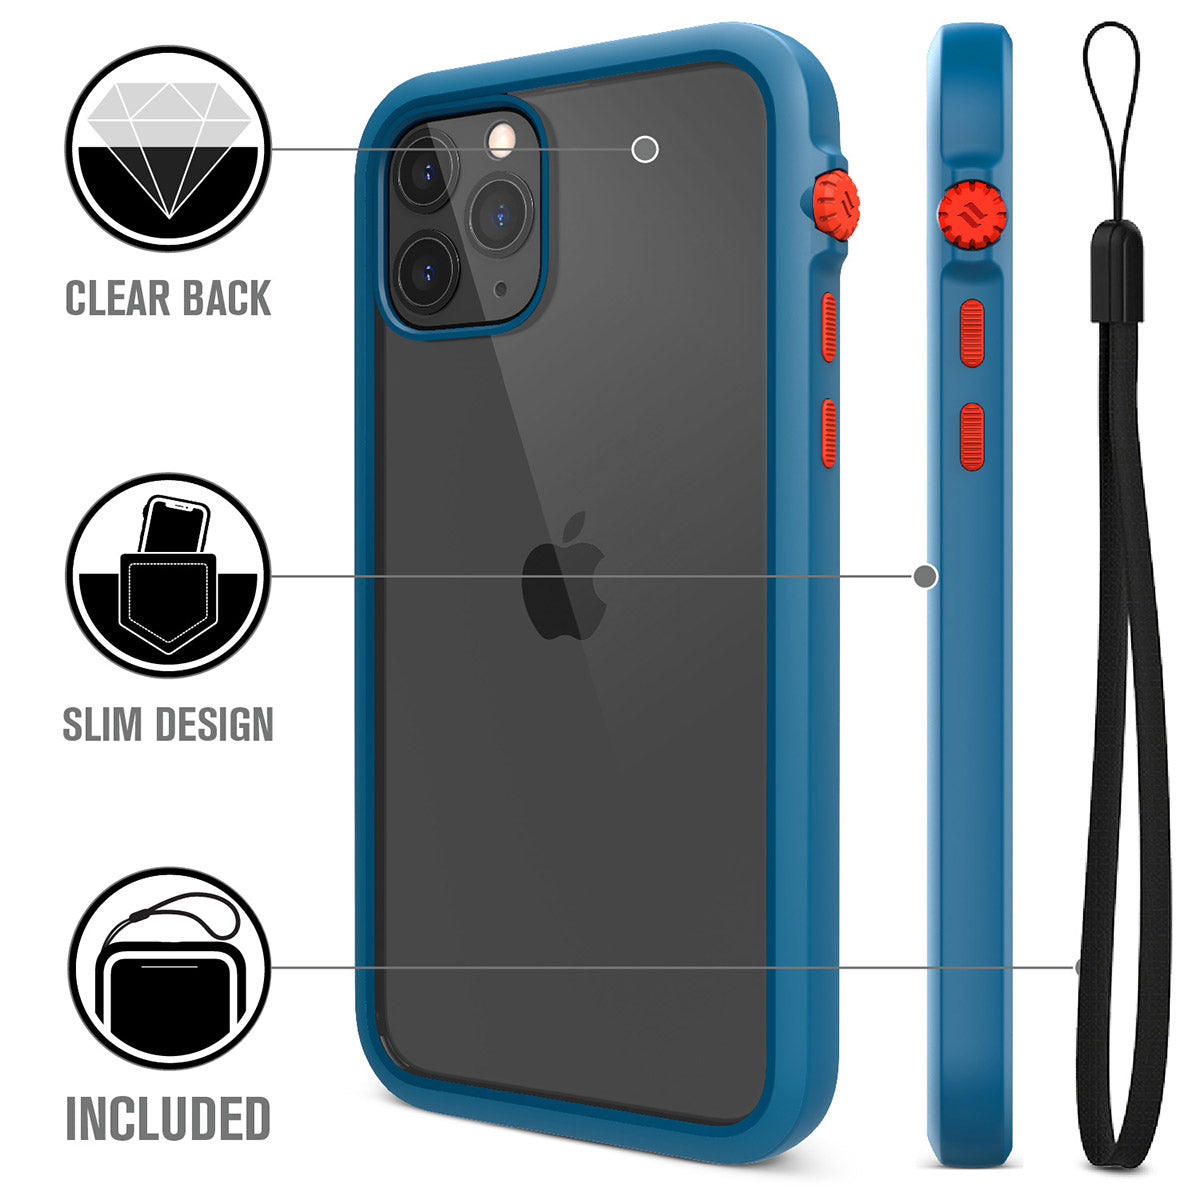 catalyst iPhone 11 series impact protection case blueridge sunset showing the back view and buttons of the case for iPhone 11 pro and a lanyard text reads clear back slim design included